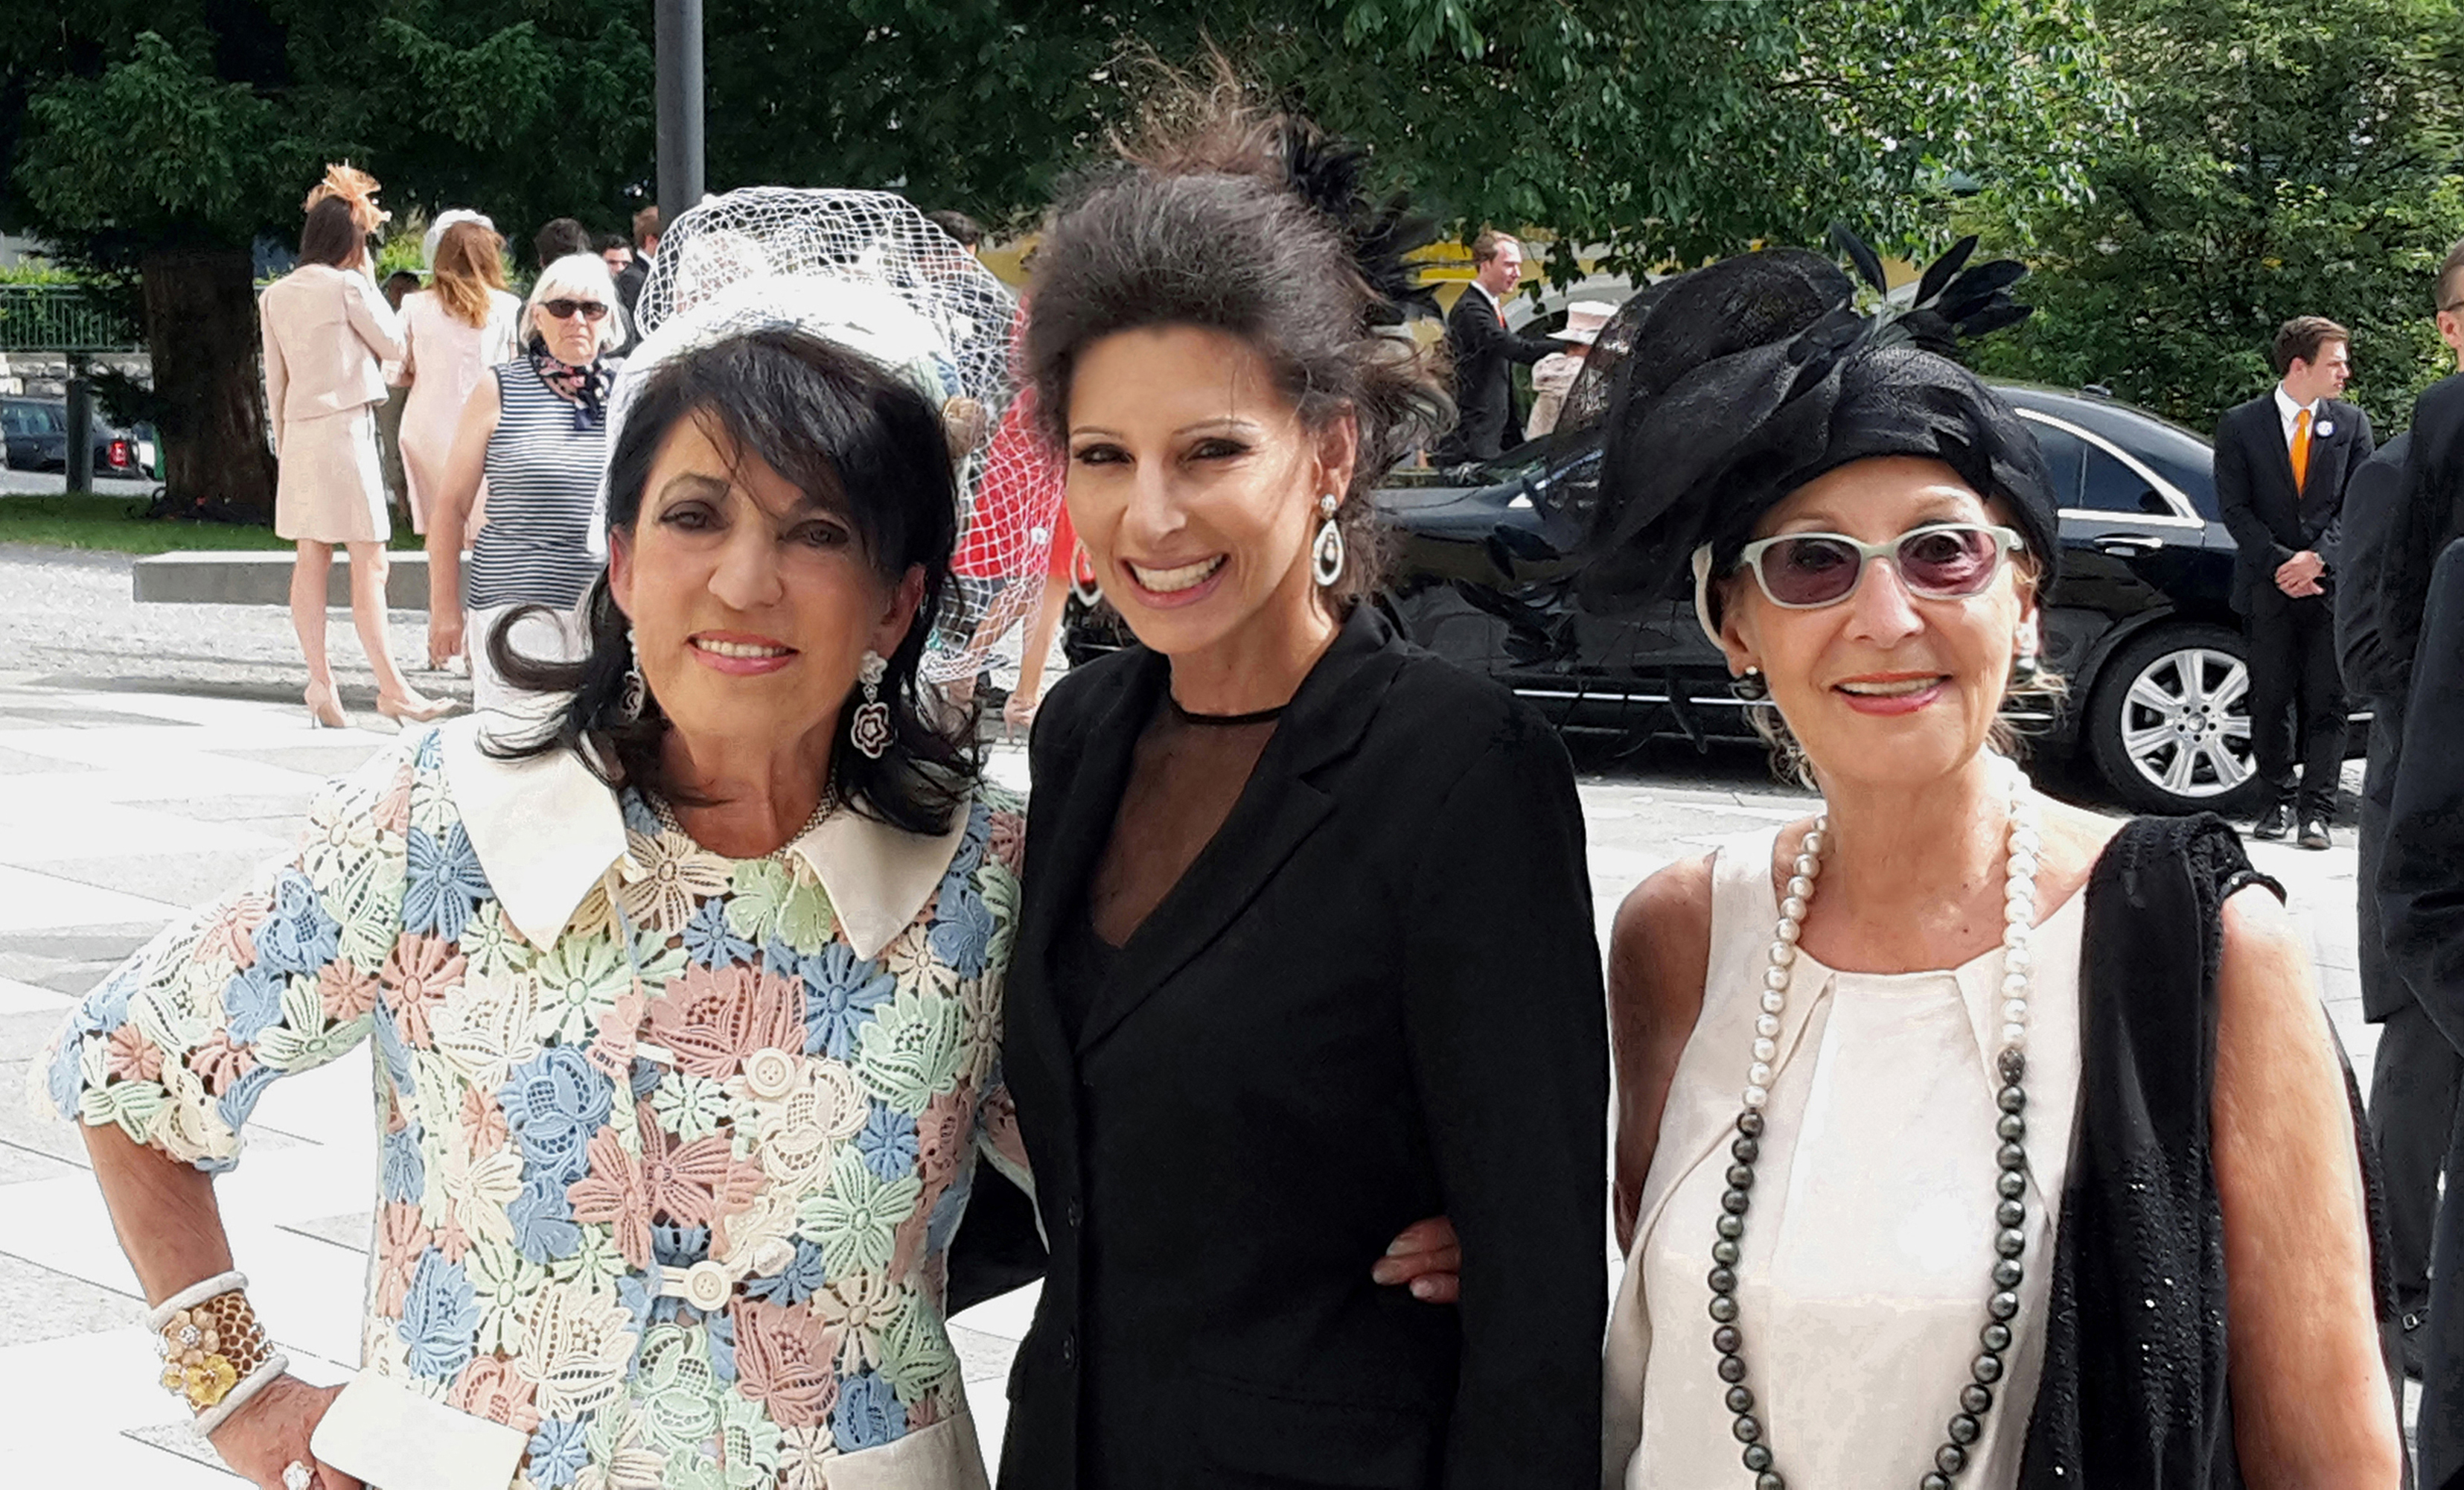 Lucia Aliberti with the Senior Executive Vice President of Sixt International Regine Sixt and Doris Papst⚘Guests⚘Special Event⚘Special Concert⚘Salzburg⚘Armani Fashion⚘Photo taken from the newspaper⚘:http://www.luciaaliberti.it #luciaaliberti #reginasixt #dorispapst #salzburg #concert #event #armanifashion